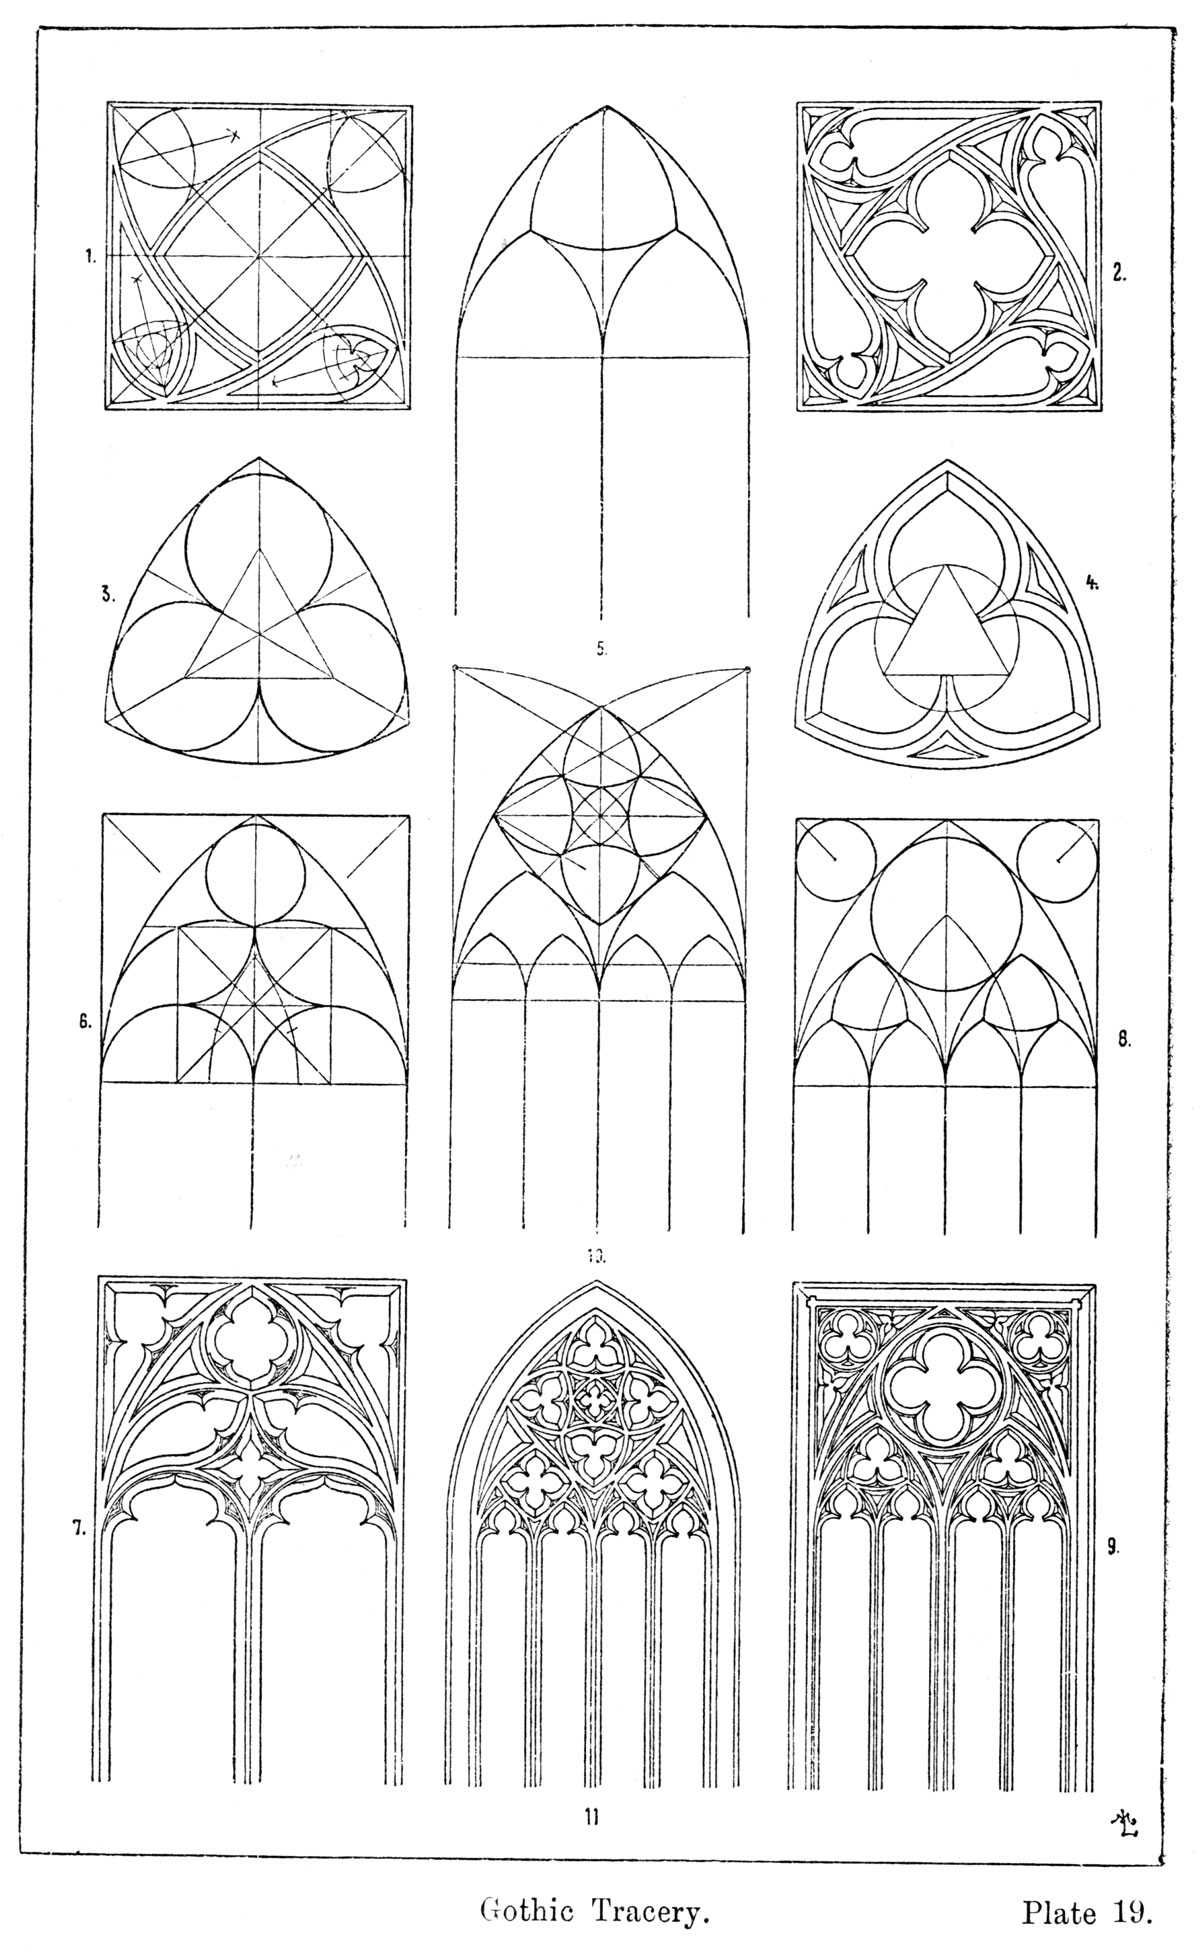 An Introduction to Gothic Tracery (With a Router) - Popular Woodworking ...